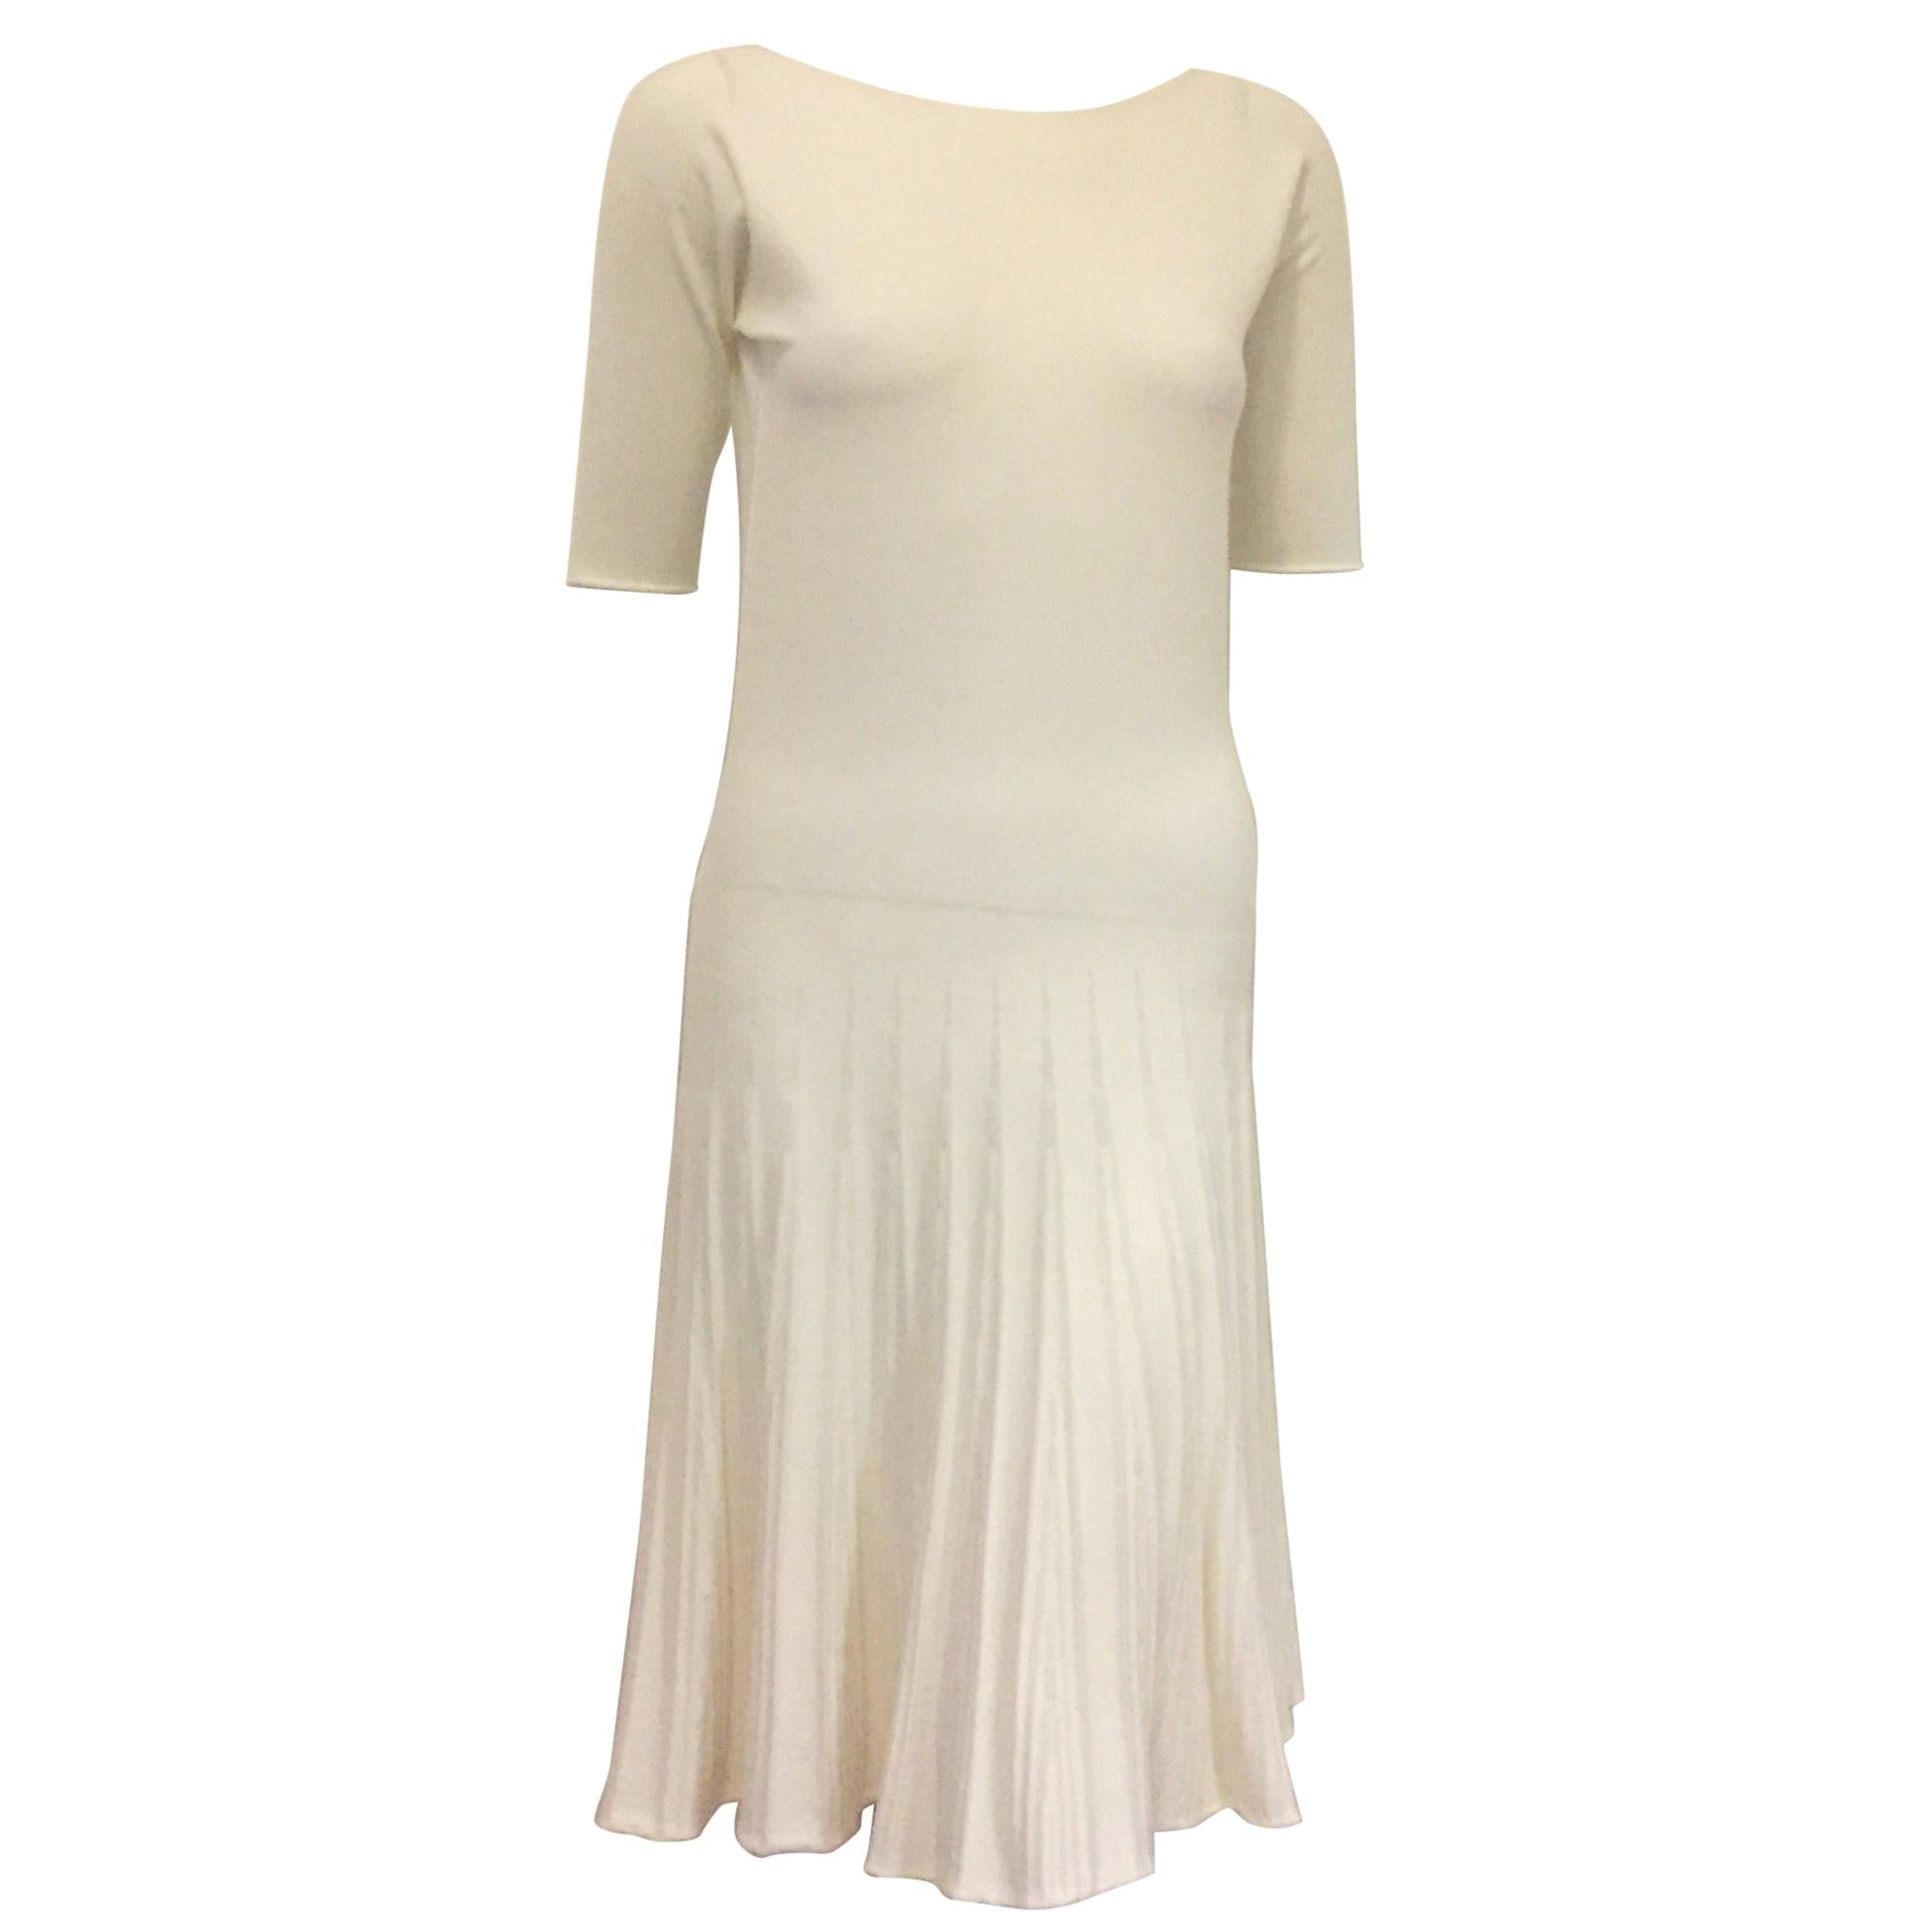 Amazing Armani Ivory Dress with Faux Pleats on Skirt and Short Sleeves